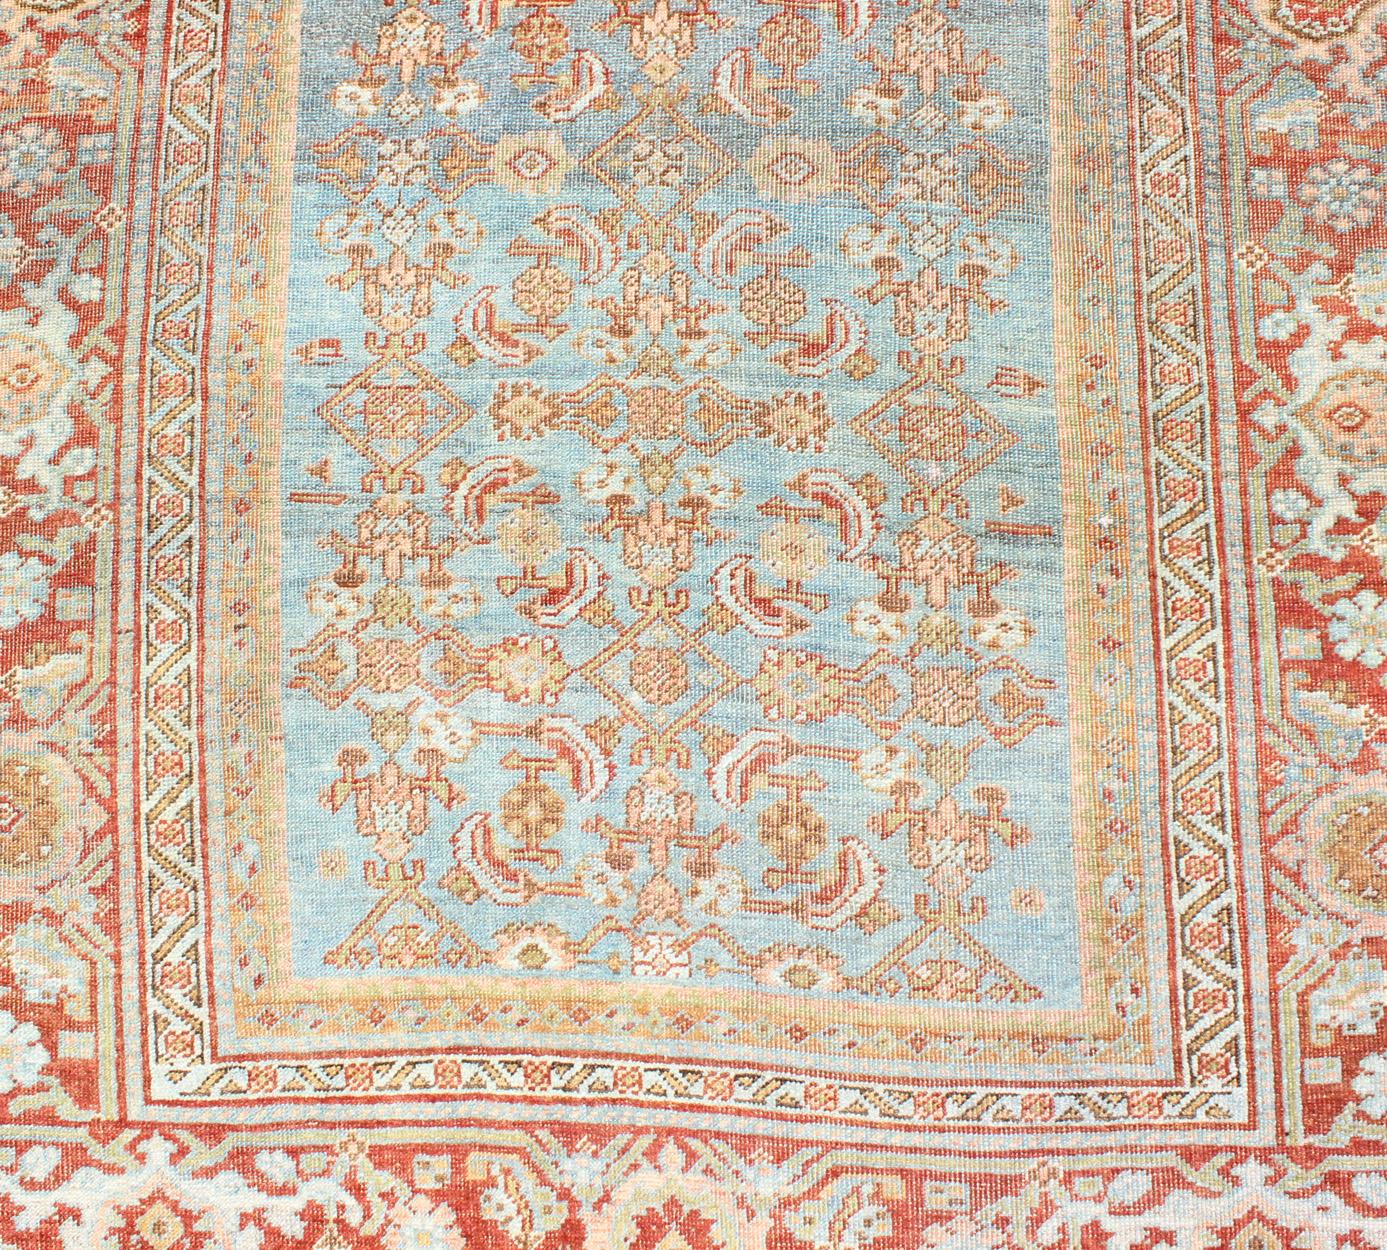 Early 20th Century Antique Persian Bidjar Rug with Blossoming Floral Design in Light Blue and Red For Sale